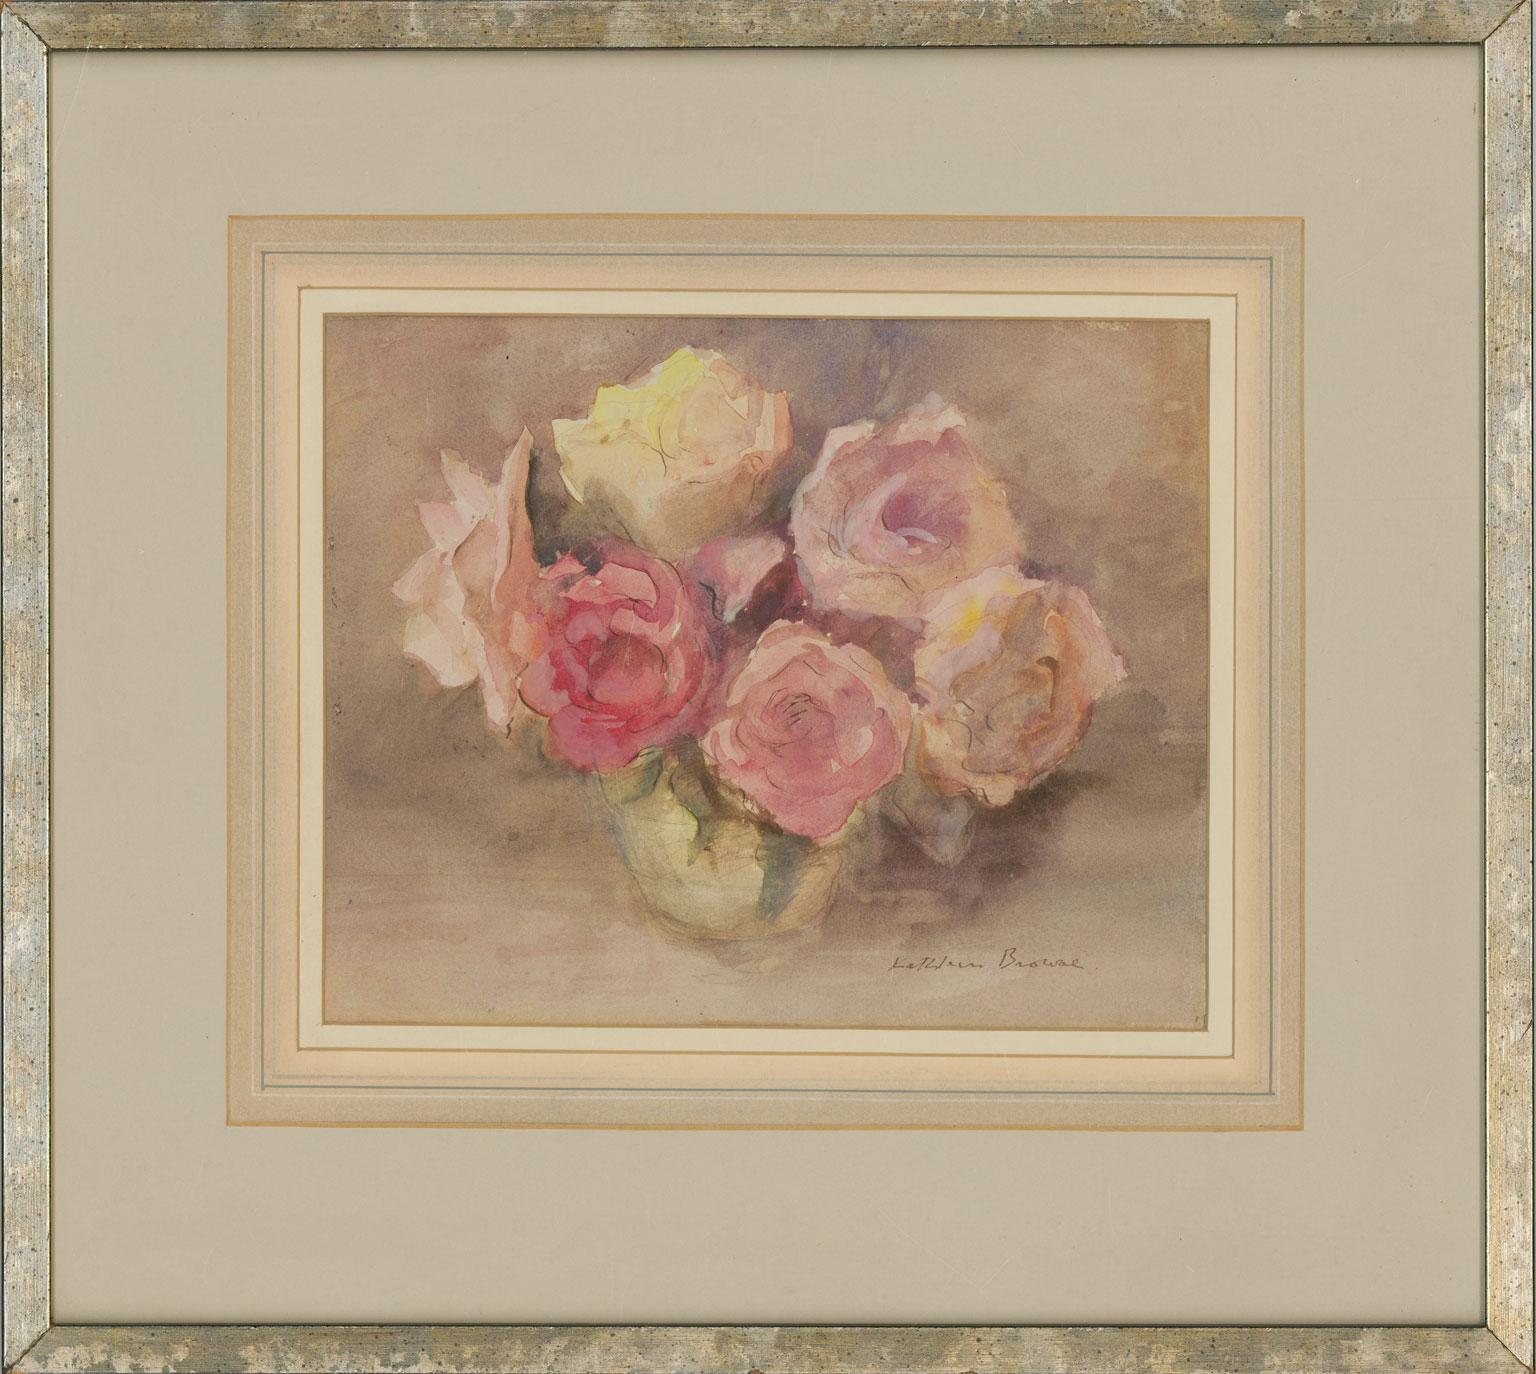 
A delightfully delicate and dynamic still life composition in watercolour, by the well-known New Zealand-born artist Kathleen Browne (1905-2007). Likely to have been painted around the middle of her career as an artist, here Browne has depicting a